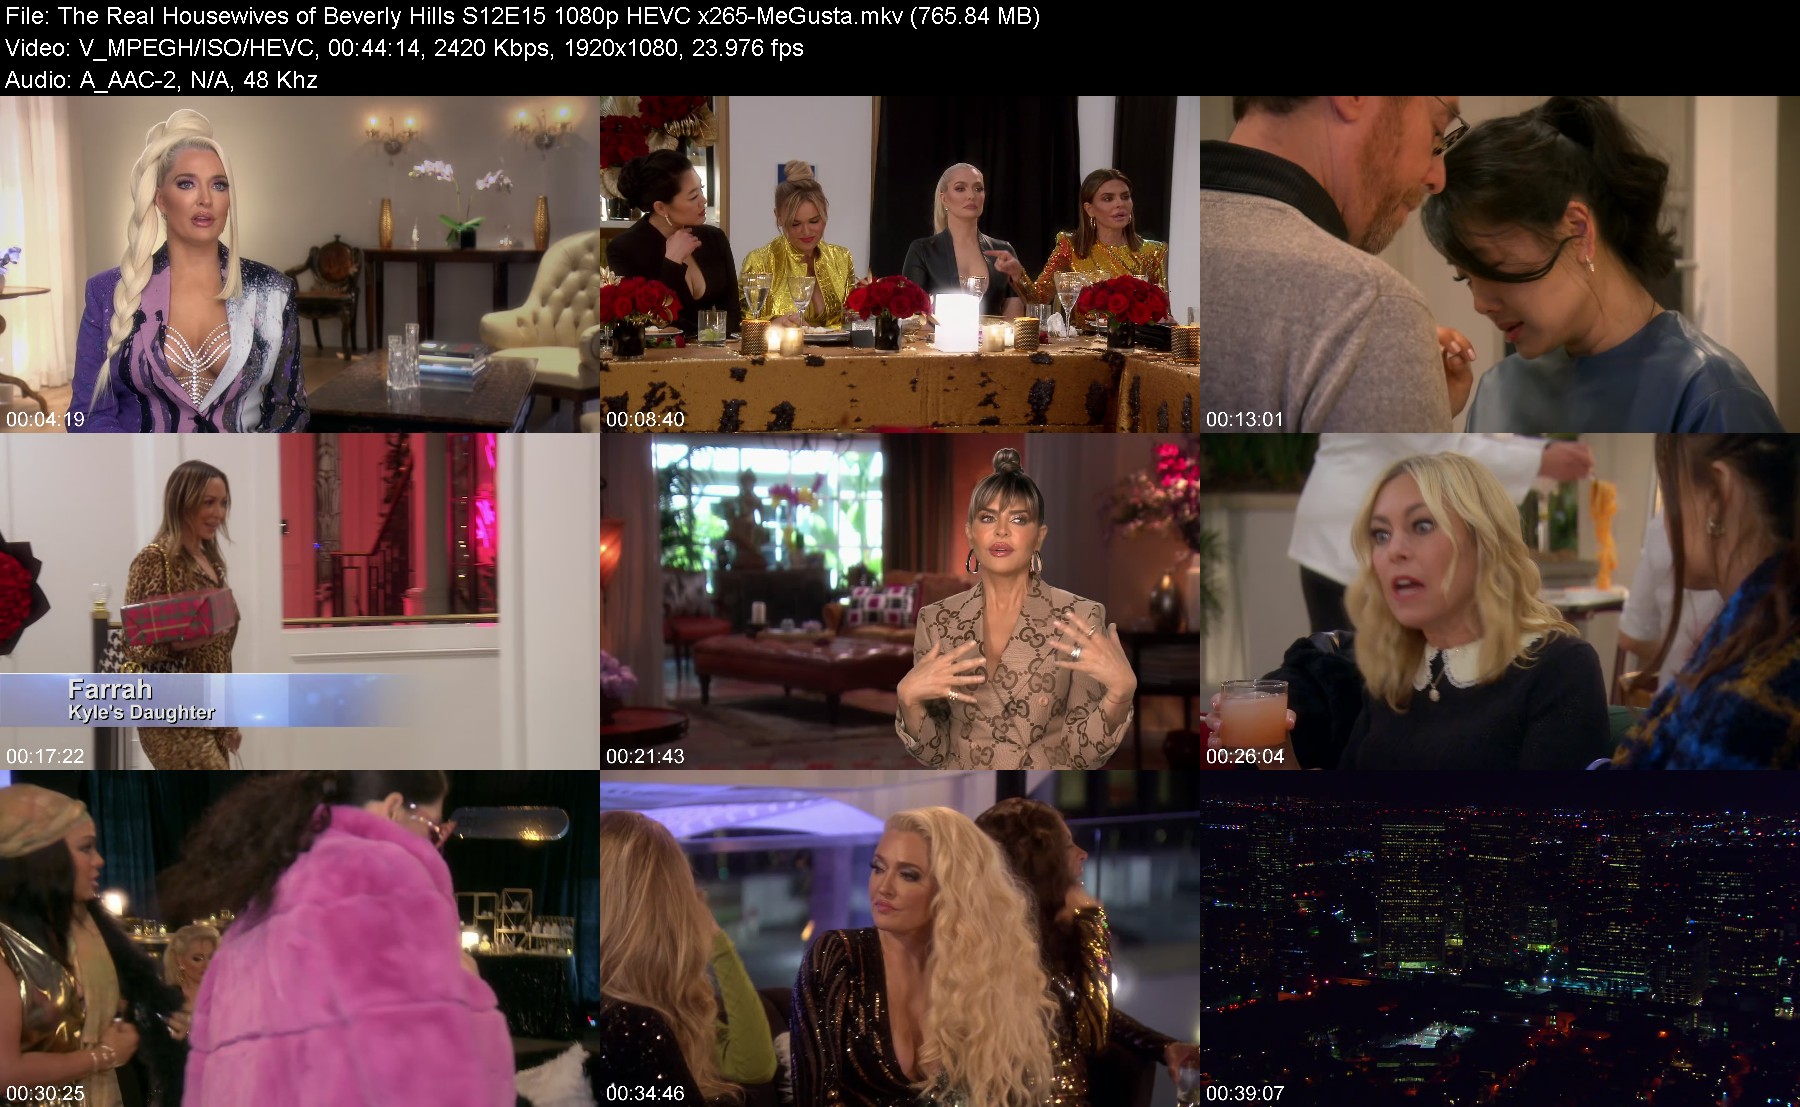 300864905_the-real-housewives-of-beverly-hills-s12e15-1080p-hevc-x265-megusta.jpg